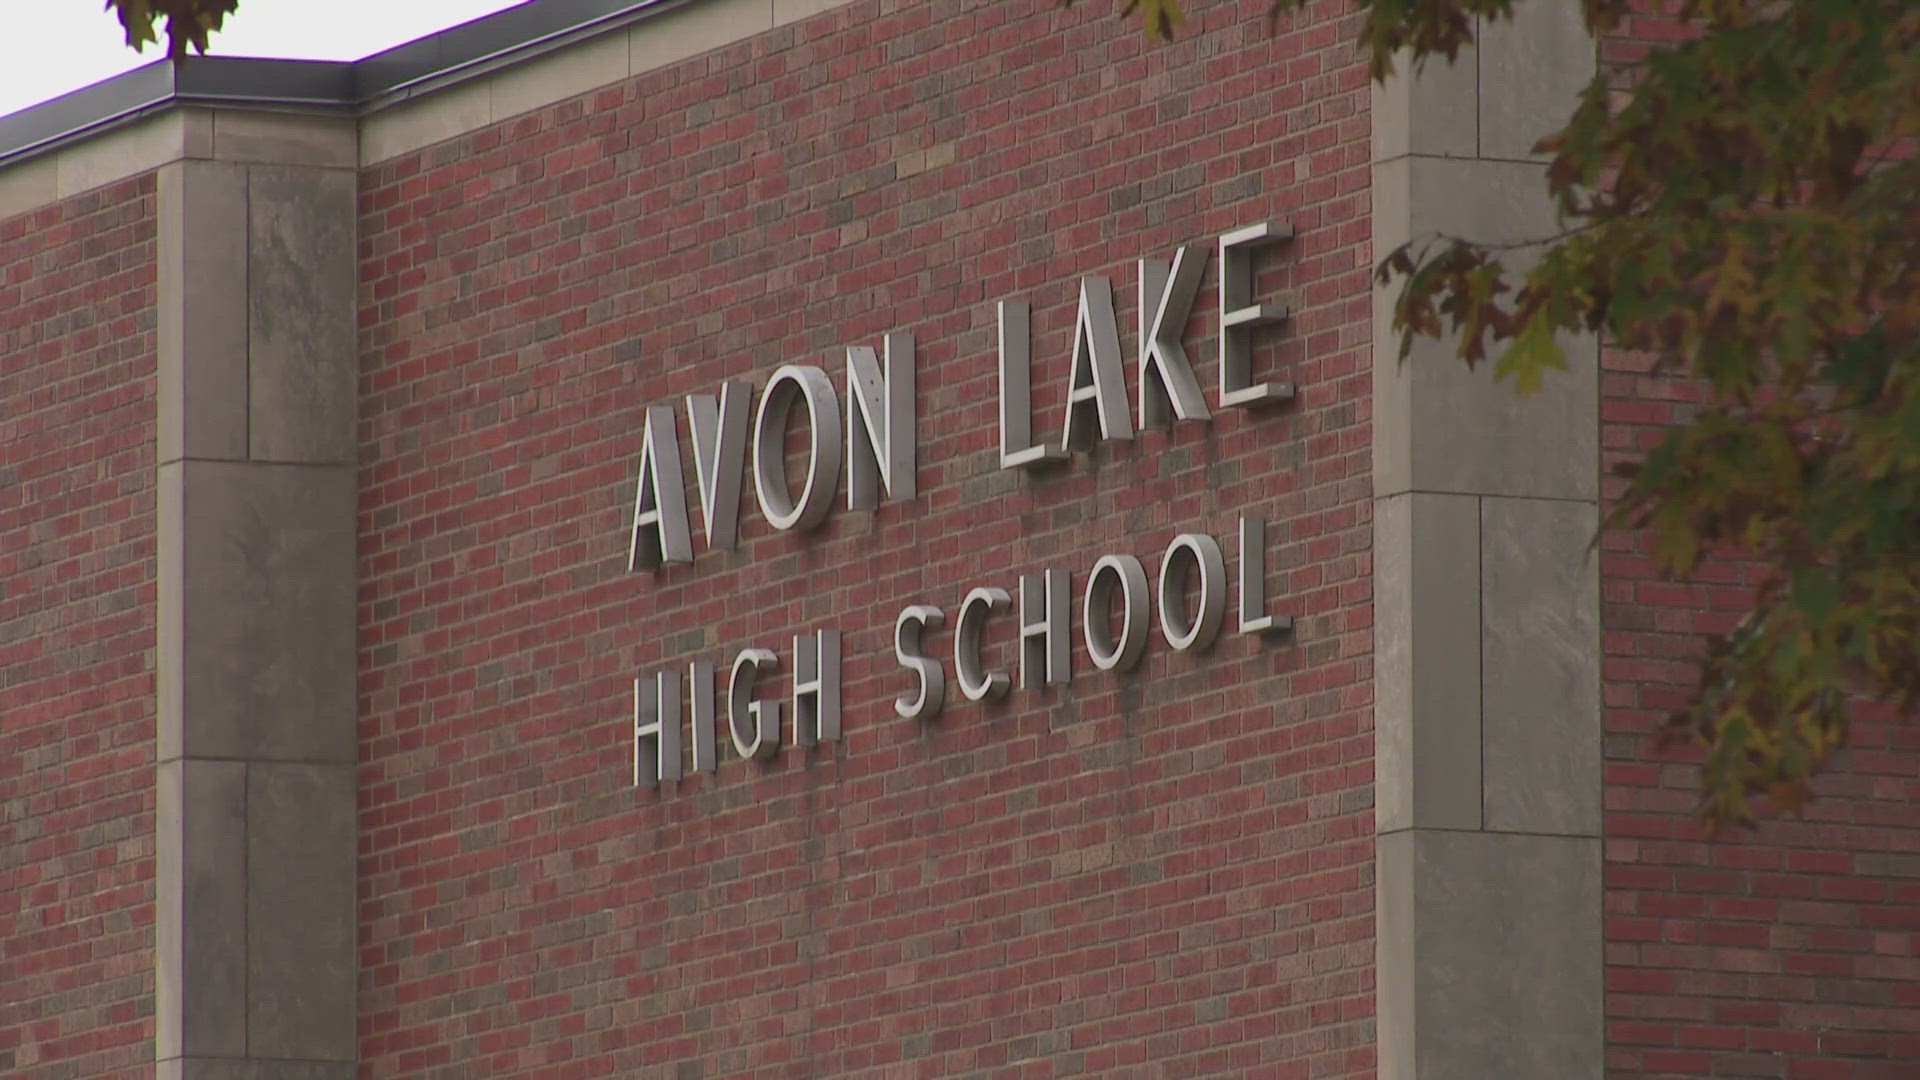 3News' Danielle Wiggins sat down with a representative from Avon Lake schools to discuss what the passing of Issue 11 would mean for the district.